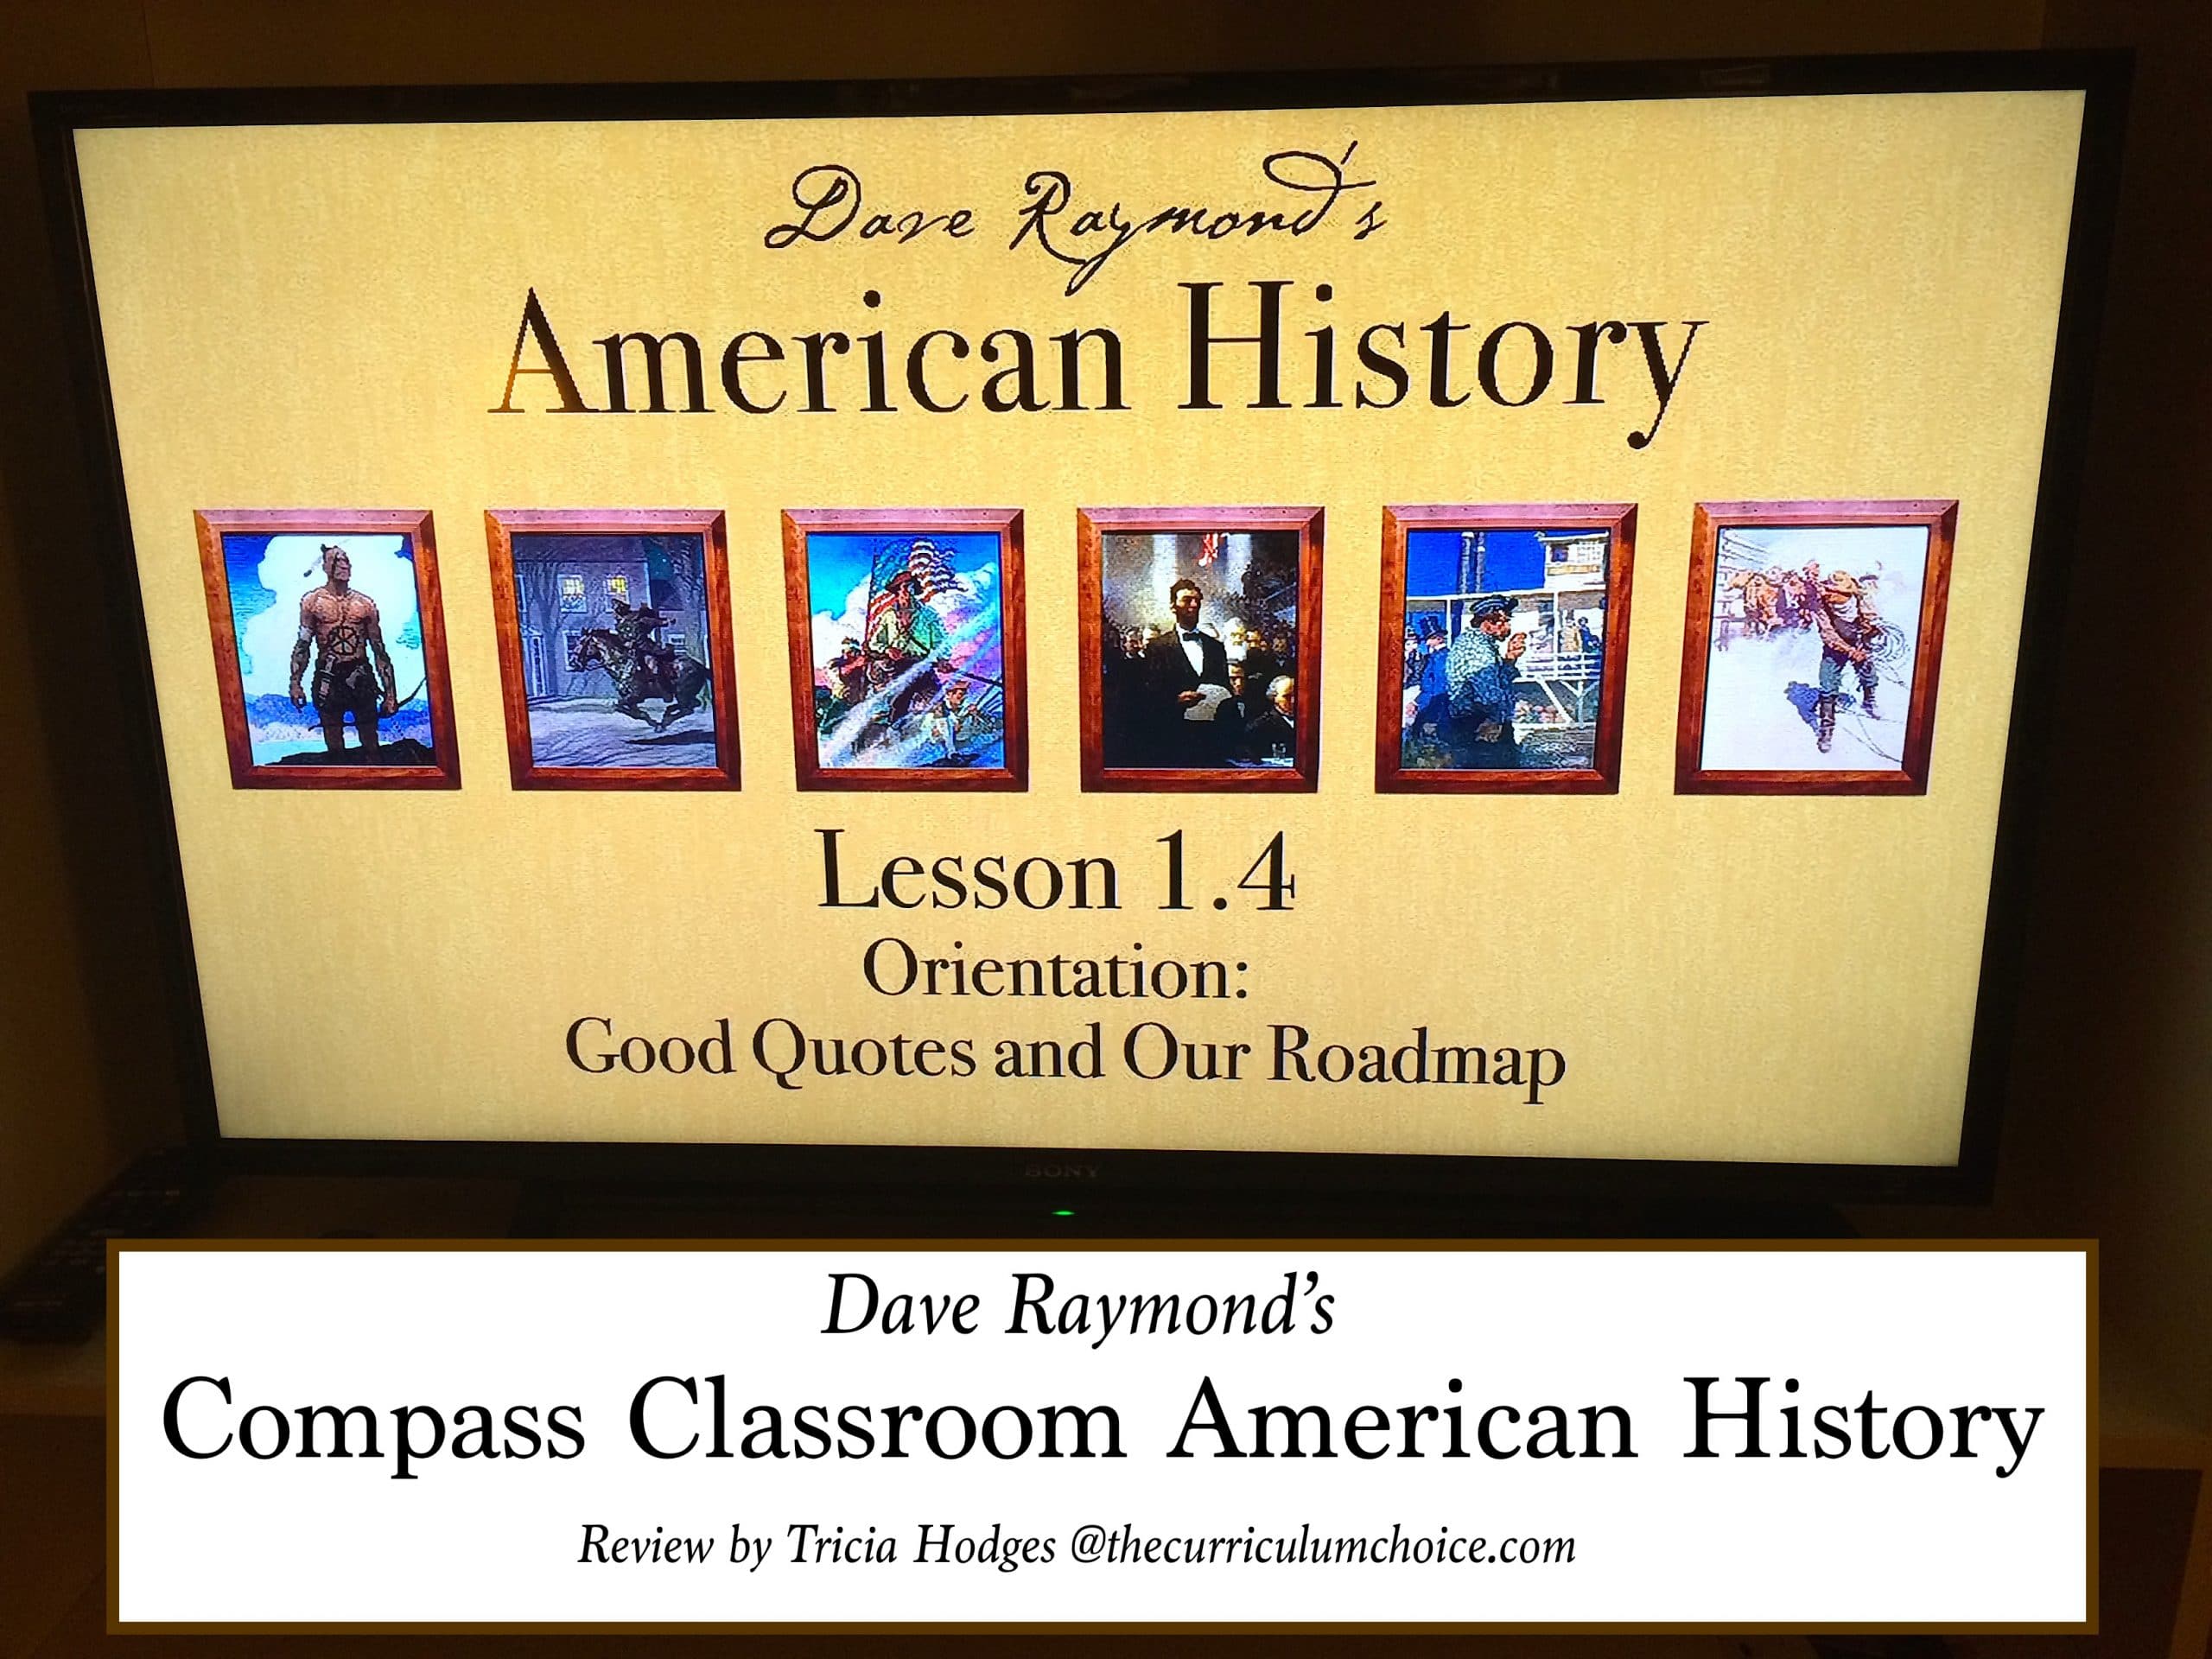 Compass Classroom American History Review